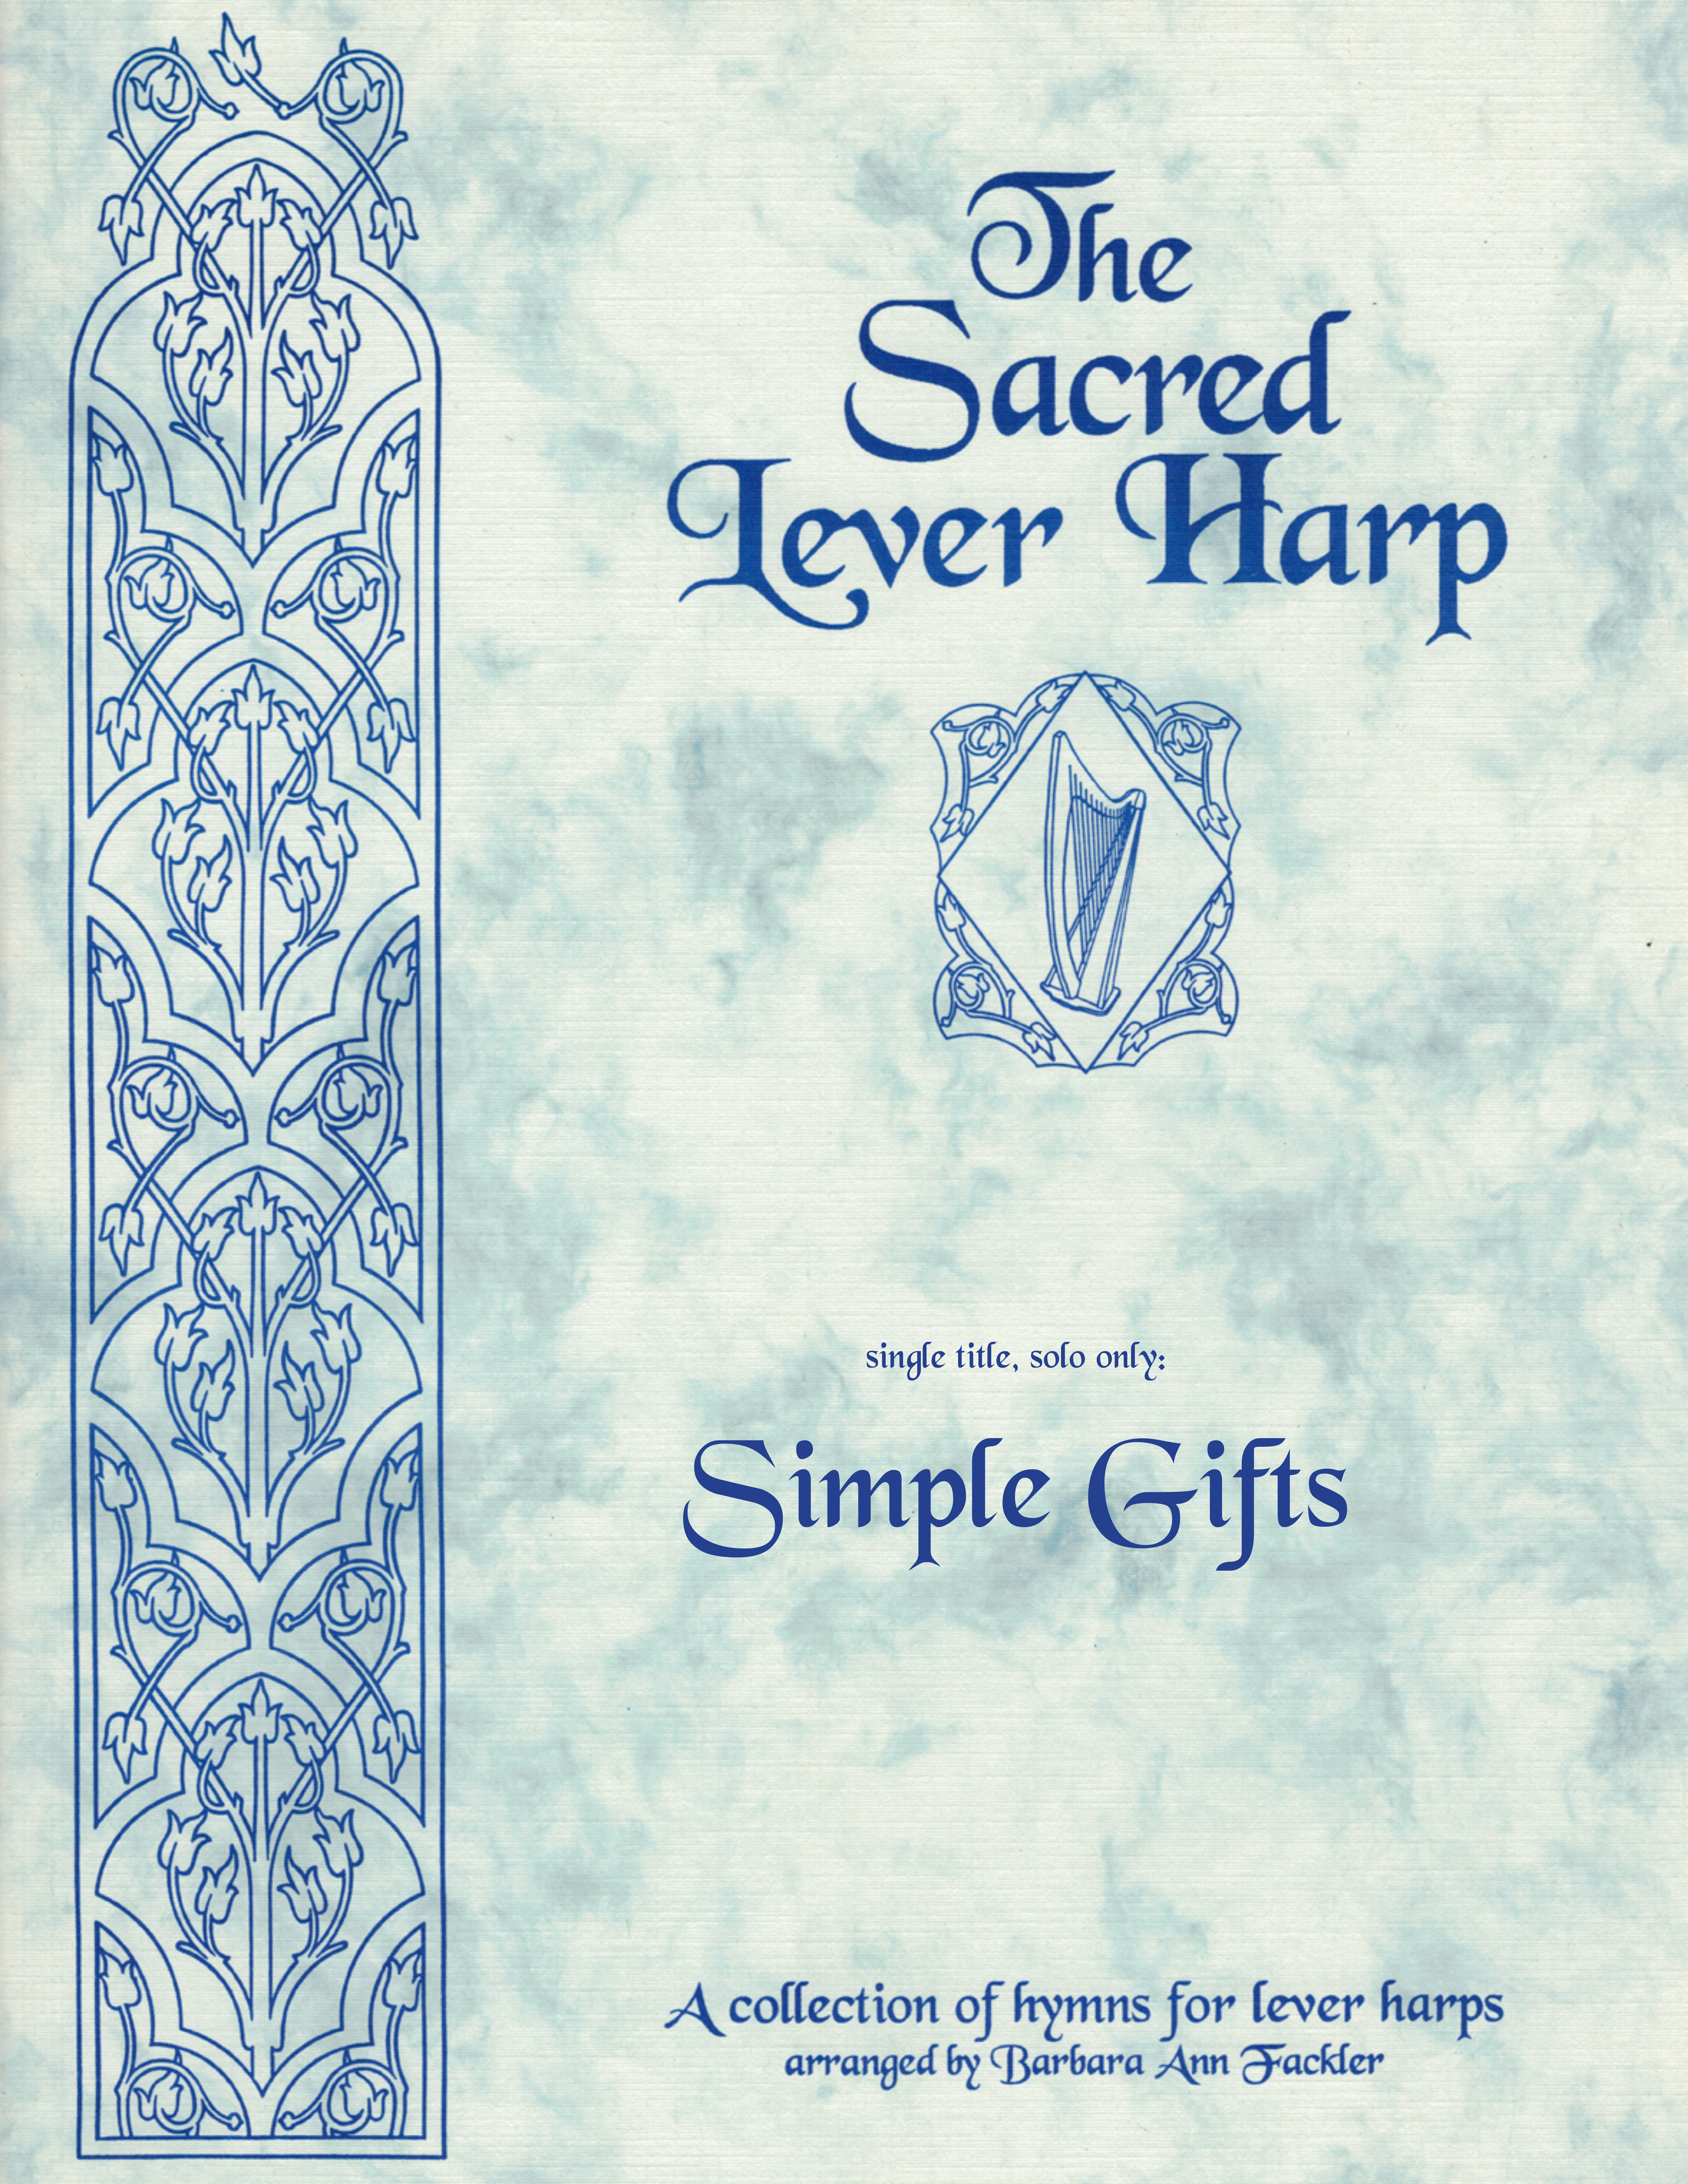 The Sacred Lever Harp, sacred solos for lever harp by Barbara Ann Fackler, SIMPLE GIFTS 